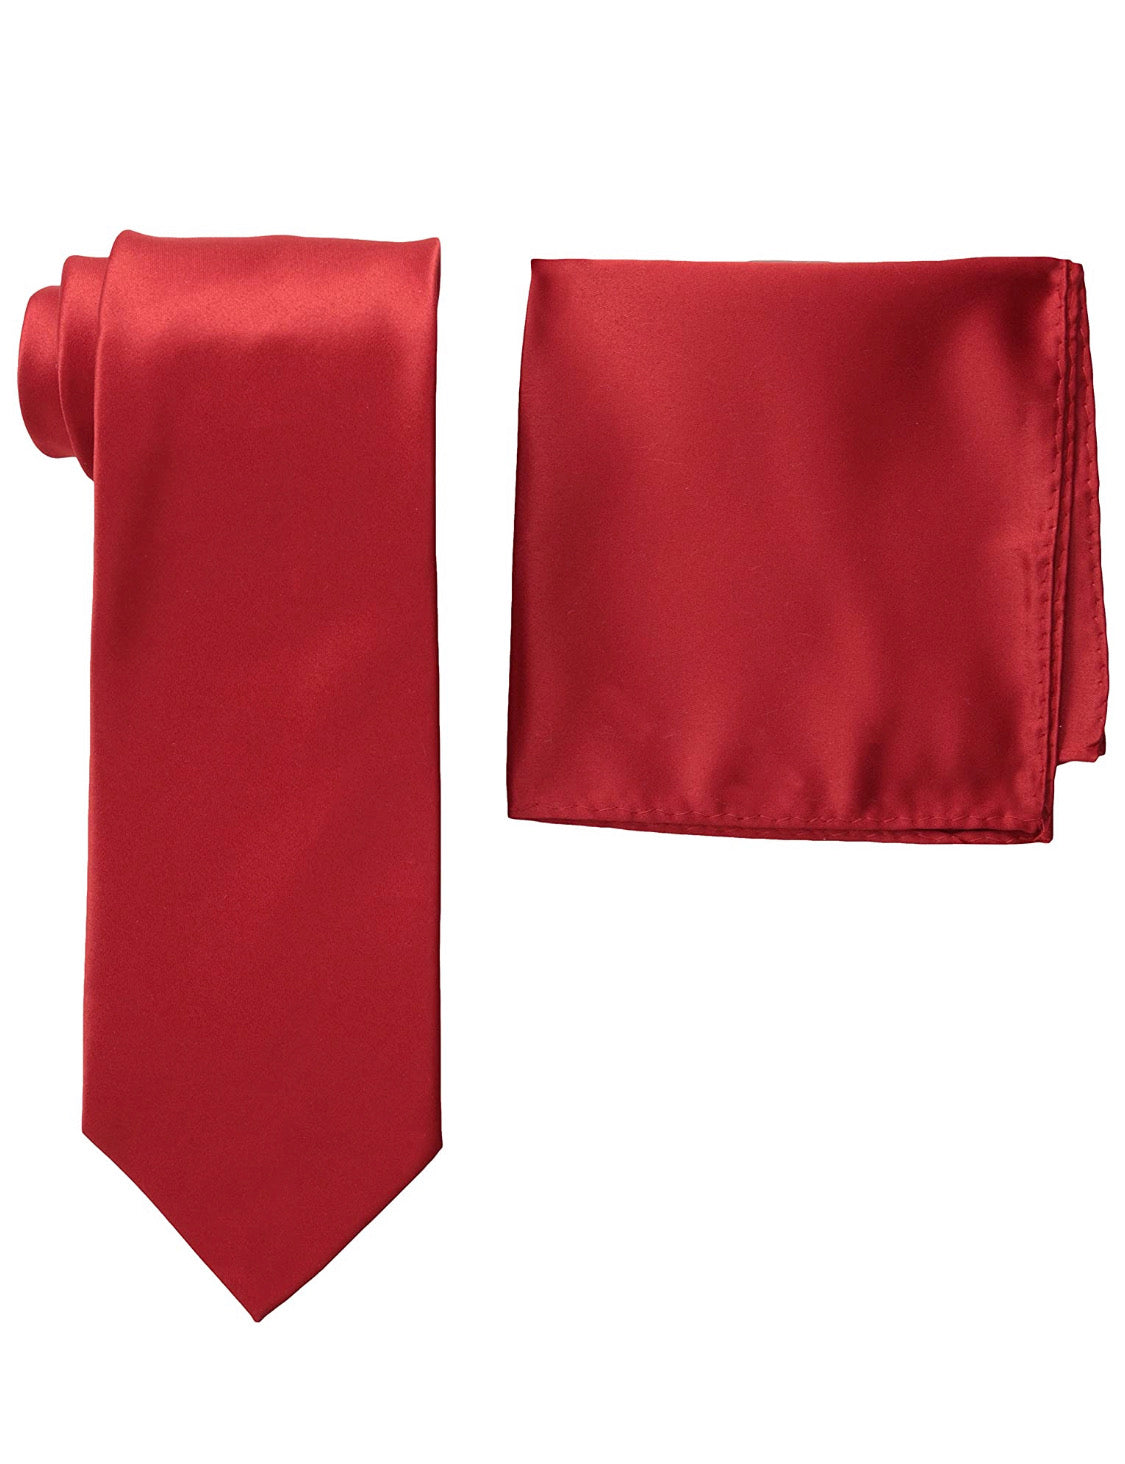 Stacy Adams Solid Crimson Tie and Hanky - On Time Fashions Tuscaloosa